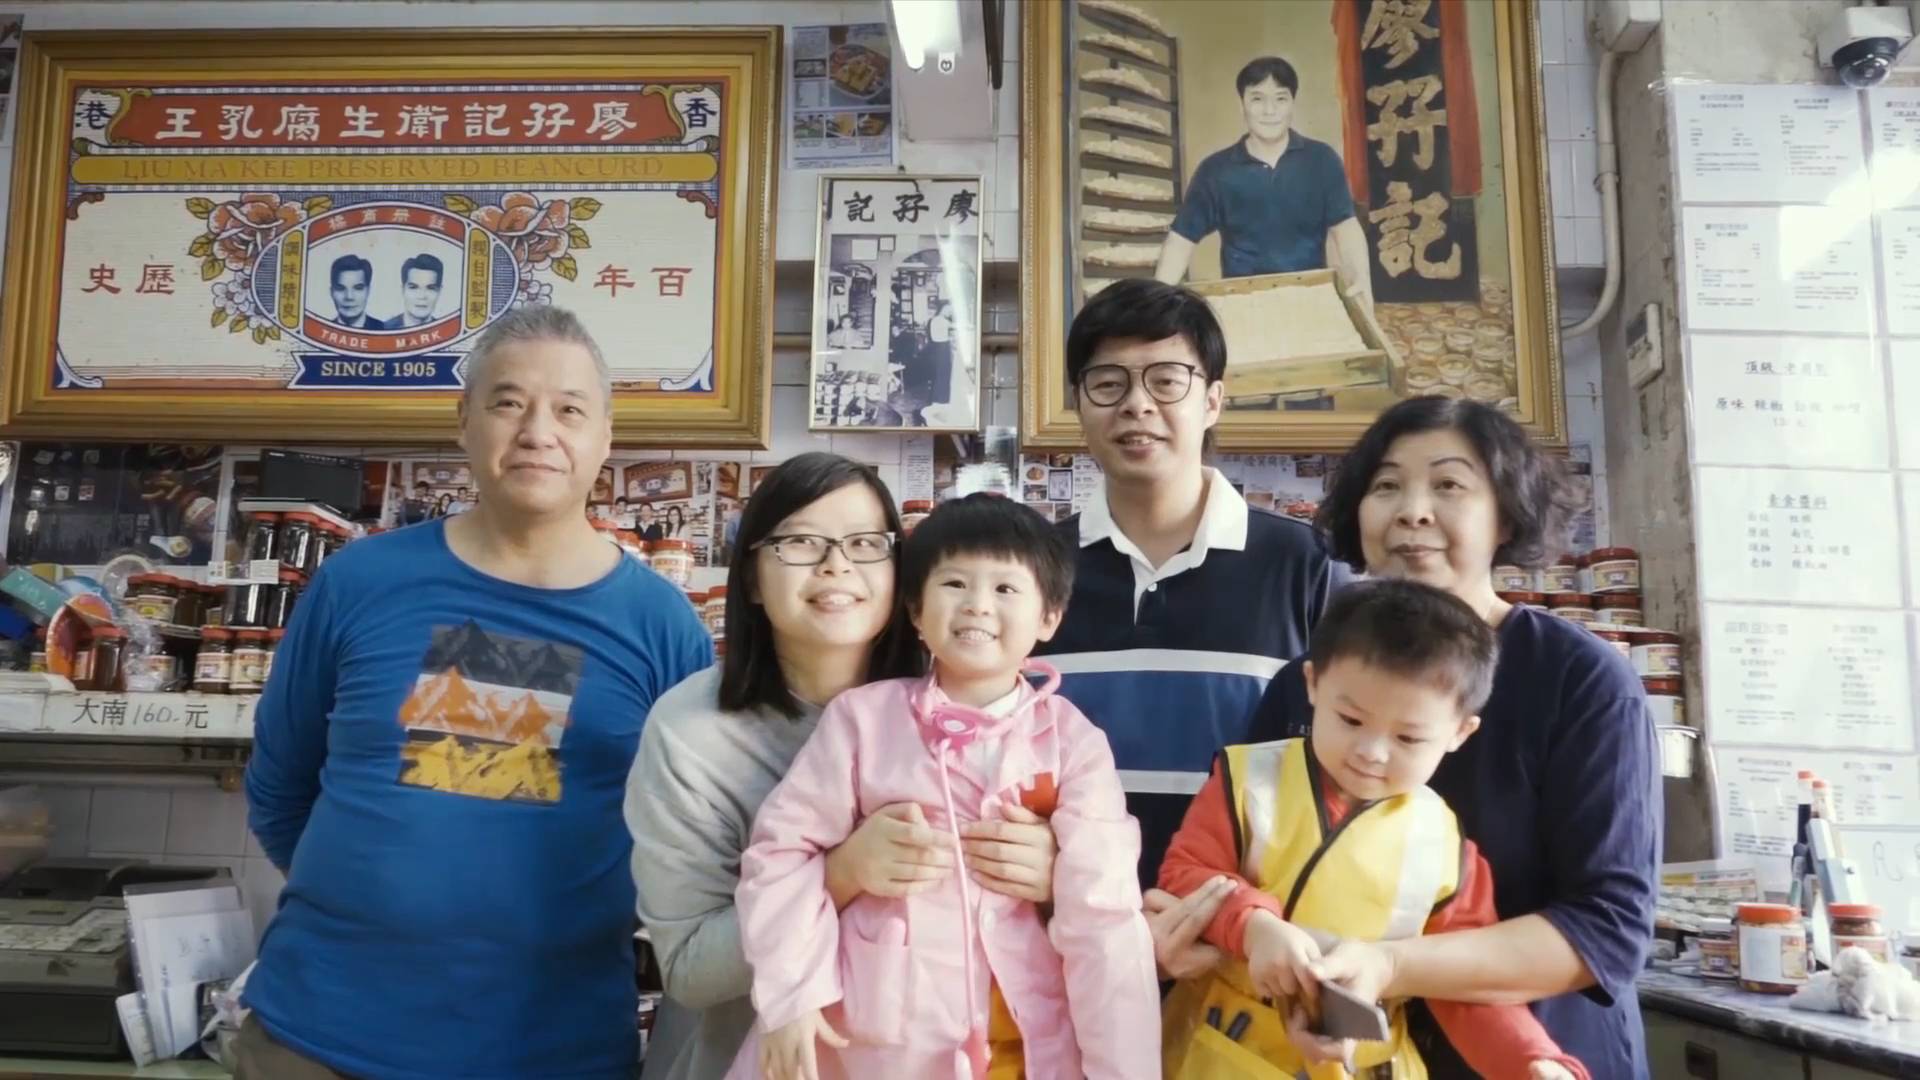 GLOBALink | A Hong Kong time-honored brand dedicated to passing down family tradition